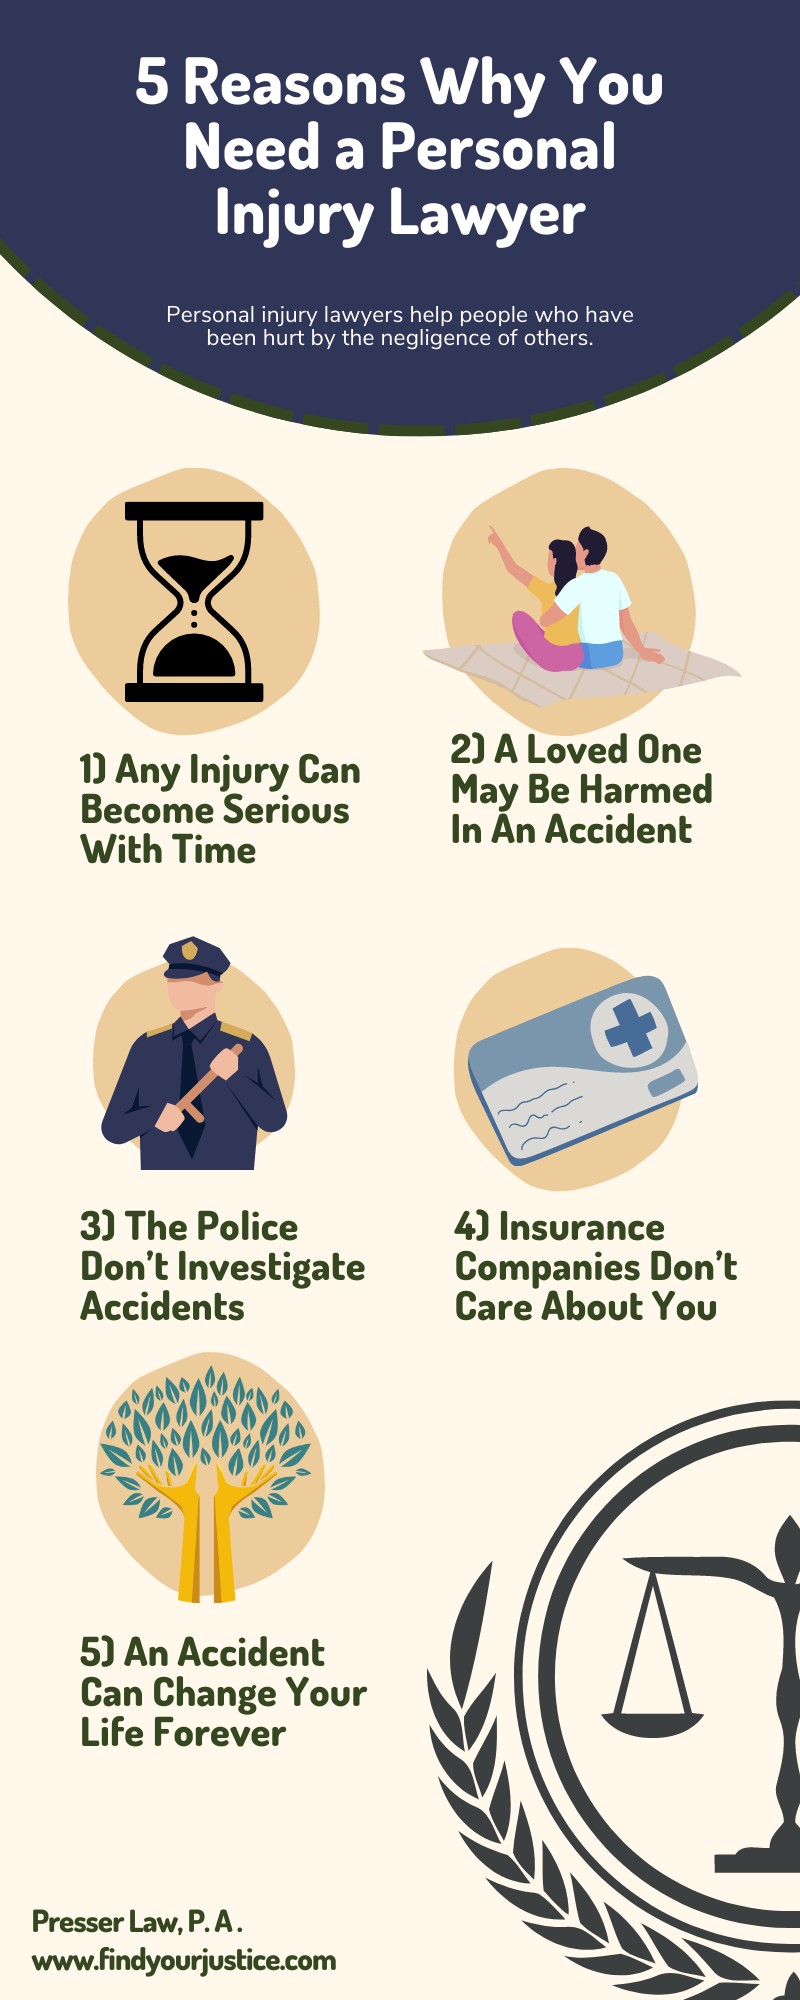 5 Reasons Why You Need a Personal Injury Lawyer infographic